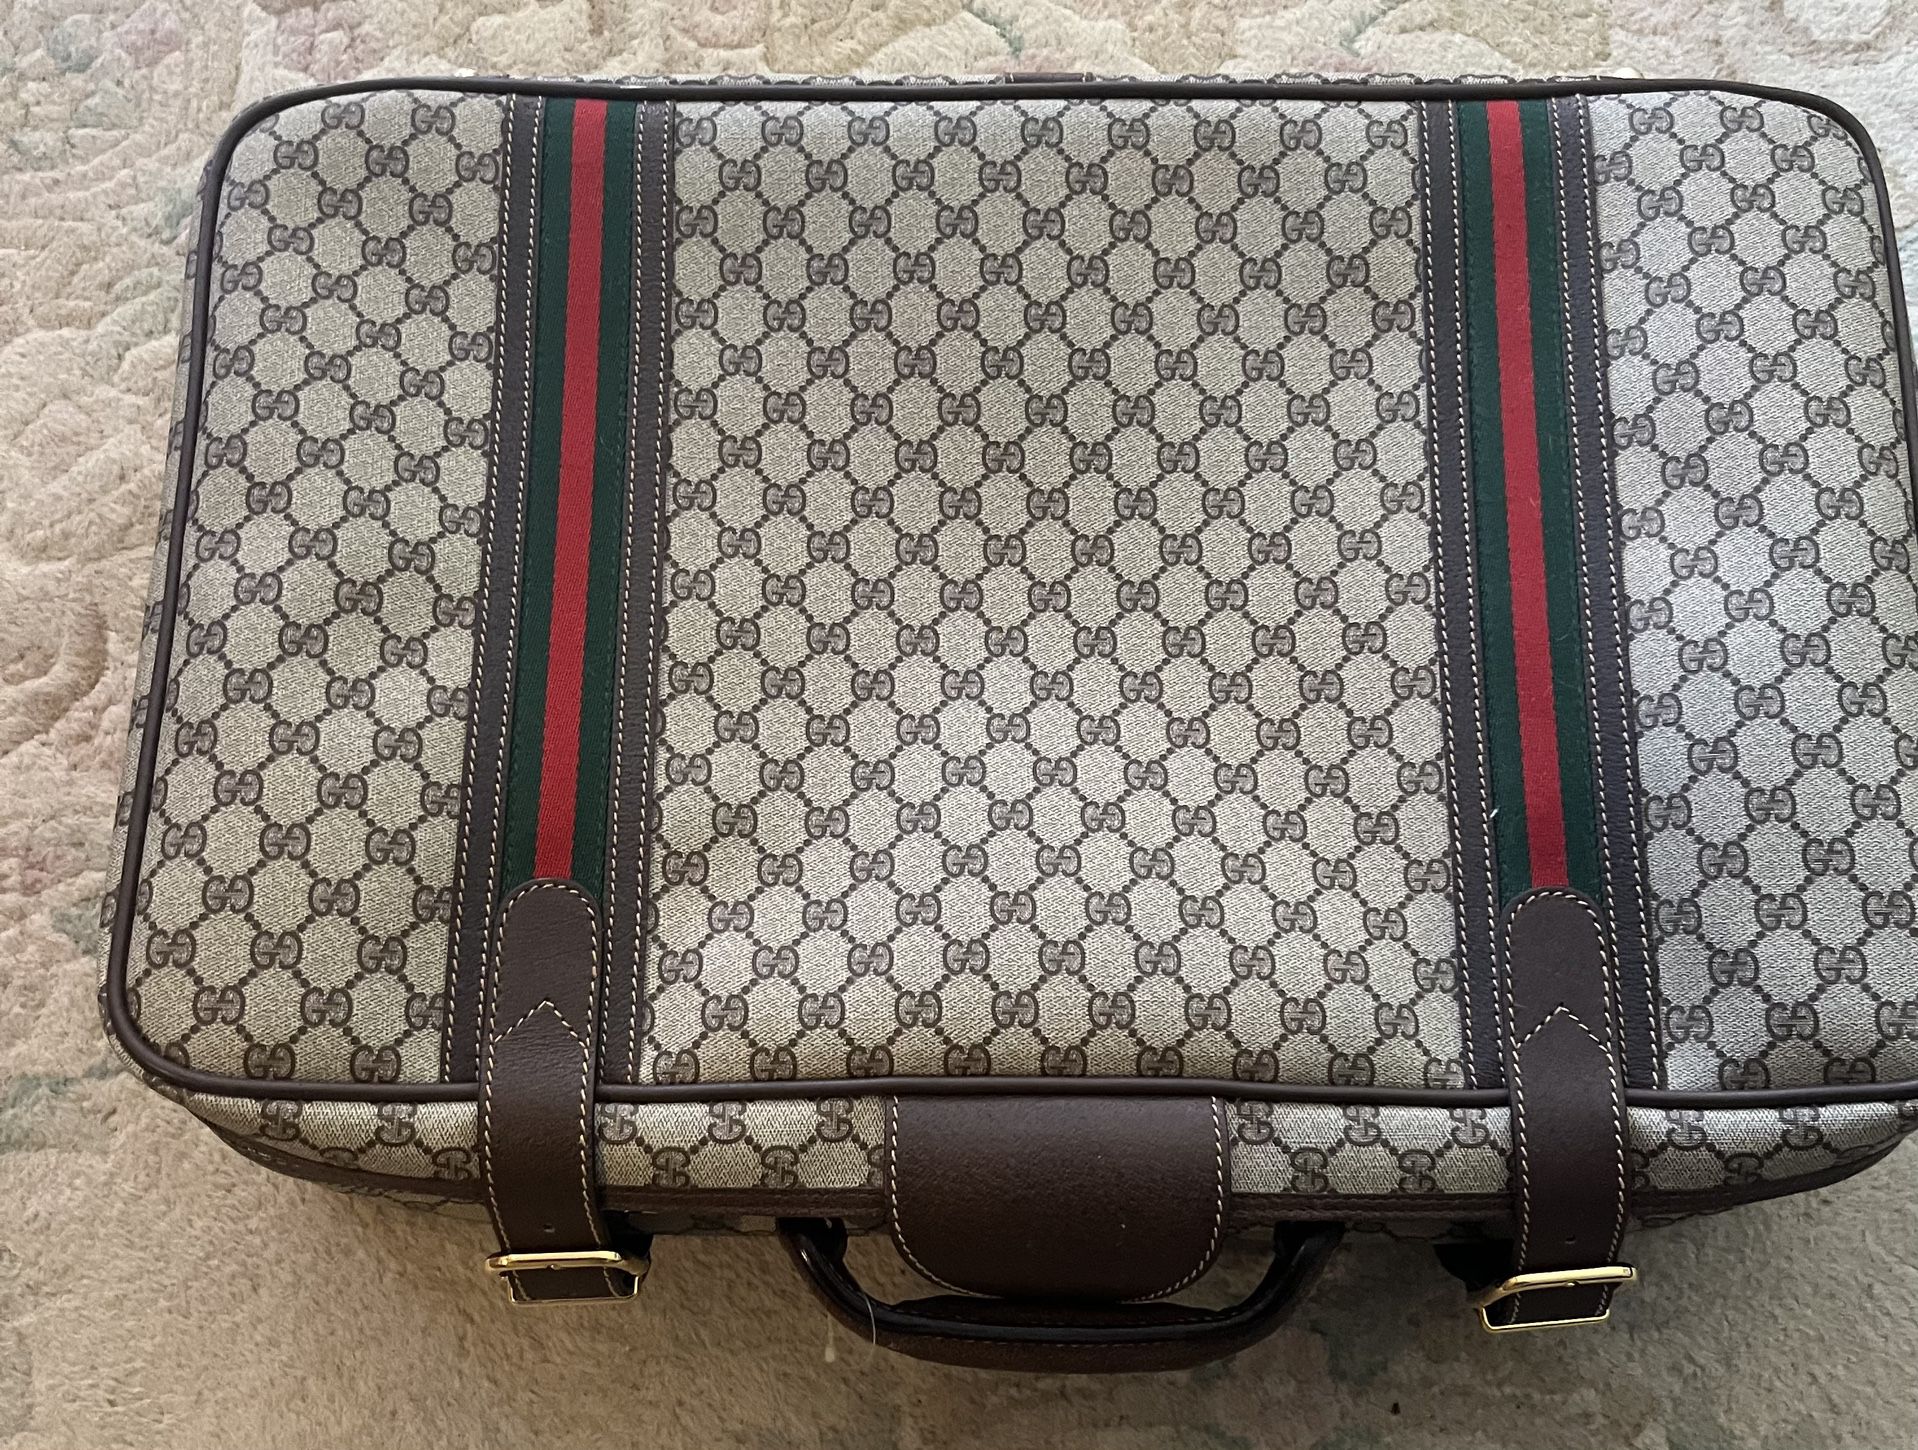 Gucci Luggage 2 Pieces Like New